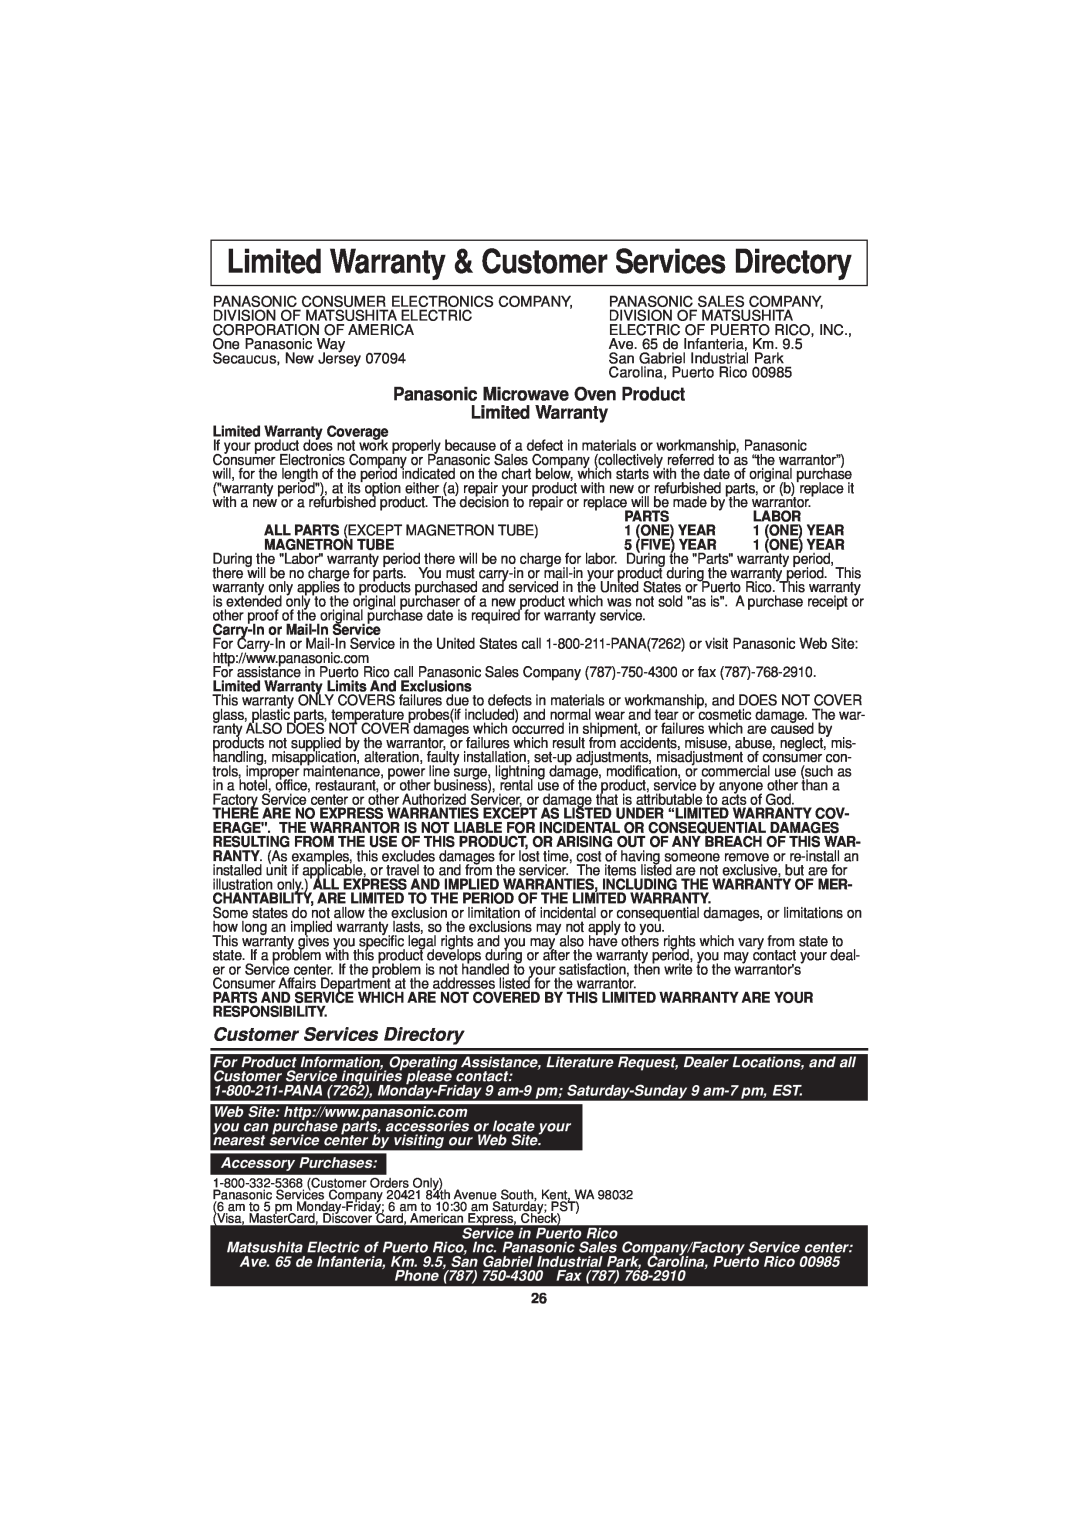 Panasonic NN-T694 Limited Warranty & Customer Services Directory, Accessory Purchases, Service in Puerto Rico 